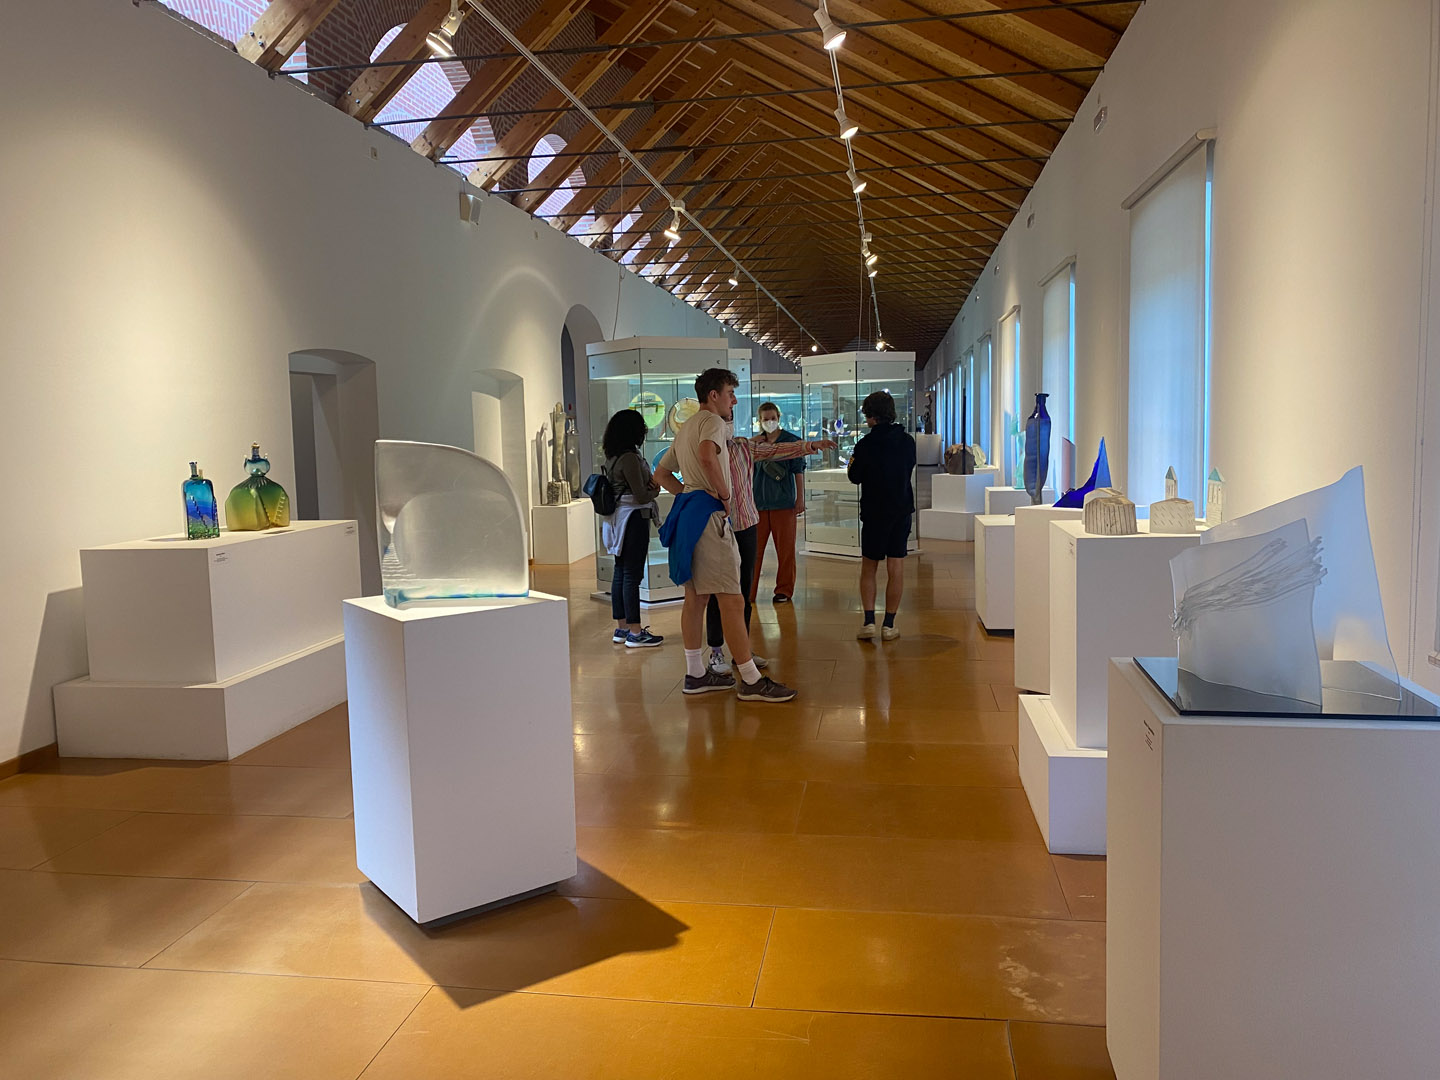 Just after a tour of the Royal Crystal Factory of La Granja, students take the opportunity to look through a collection of glass art.  Photo by Zeke Lloyd ’24